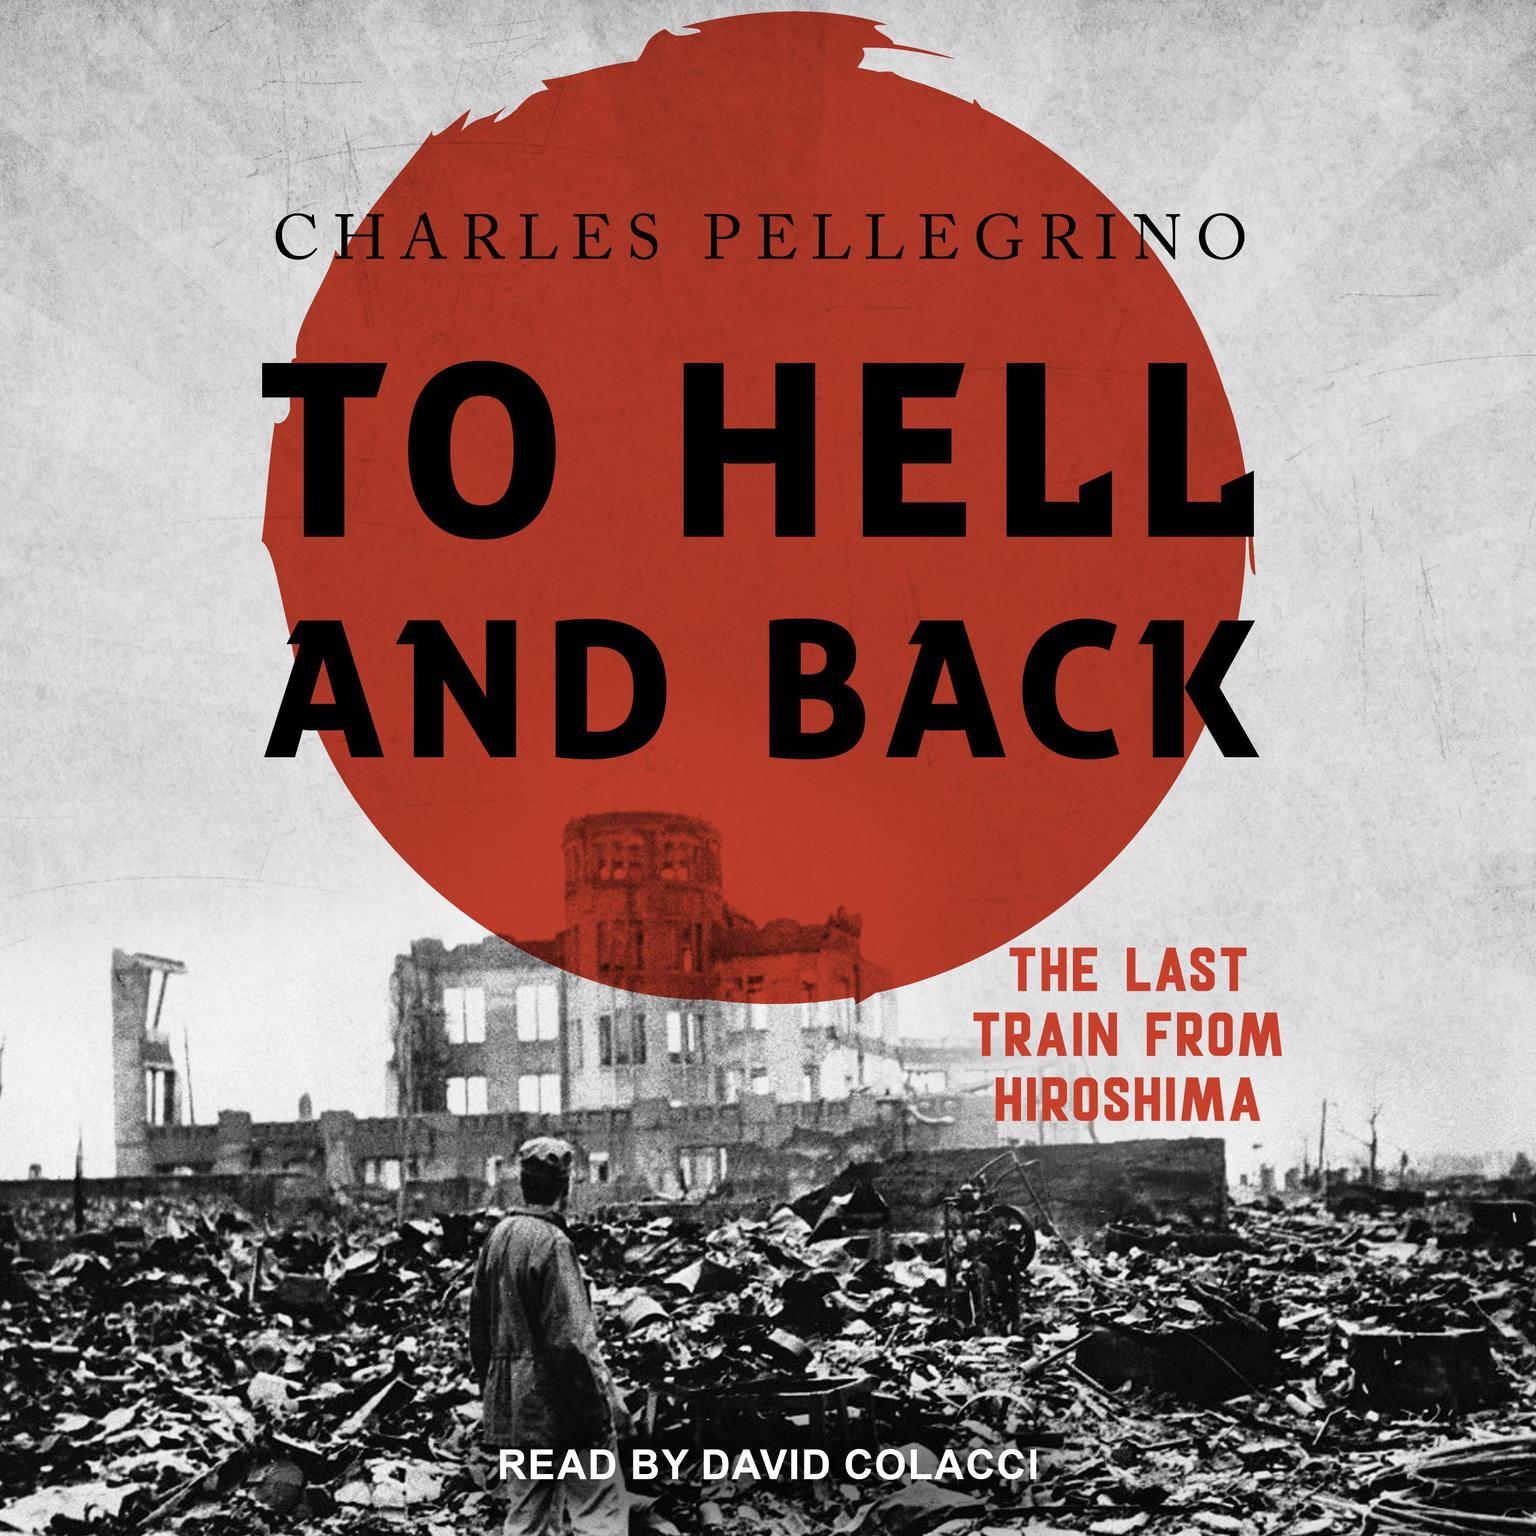 To Hell And Back: The Last Train From Hiroshima Audiobook, by Charles Pellegrino